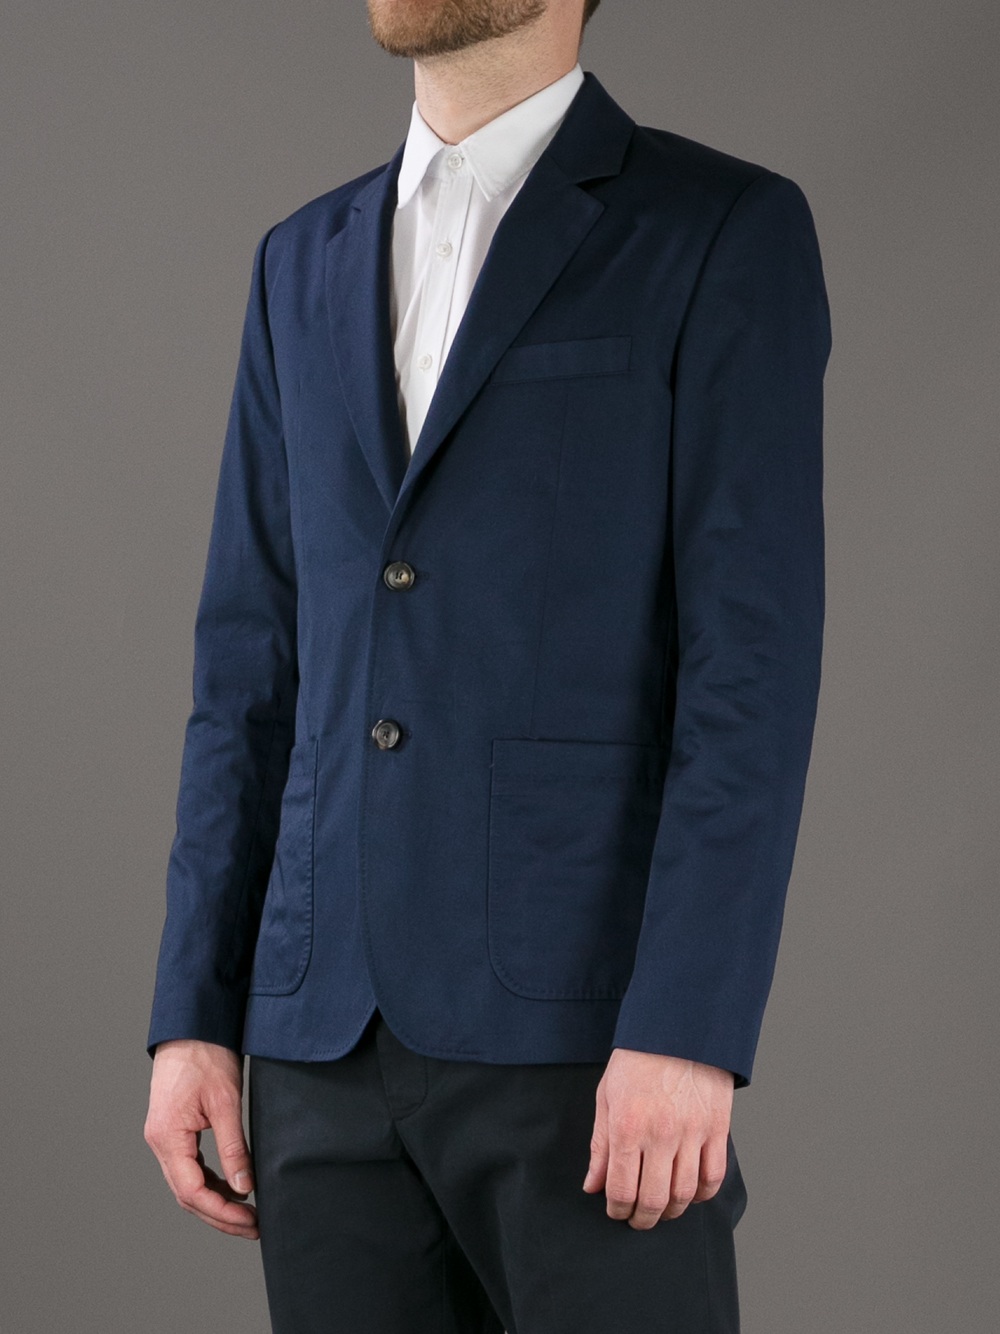 A.P.C. Two Button Blazer in Blue for Men - Lyst